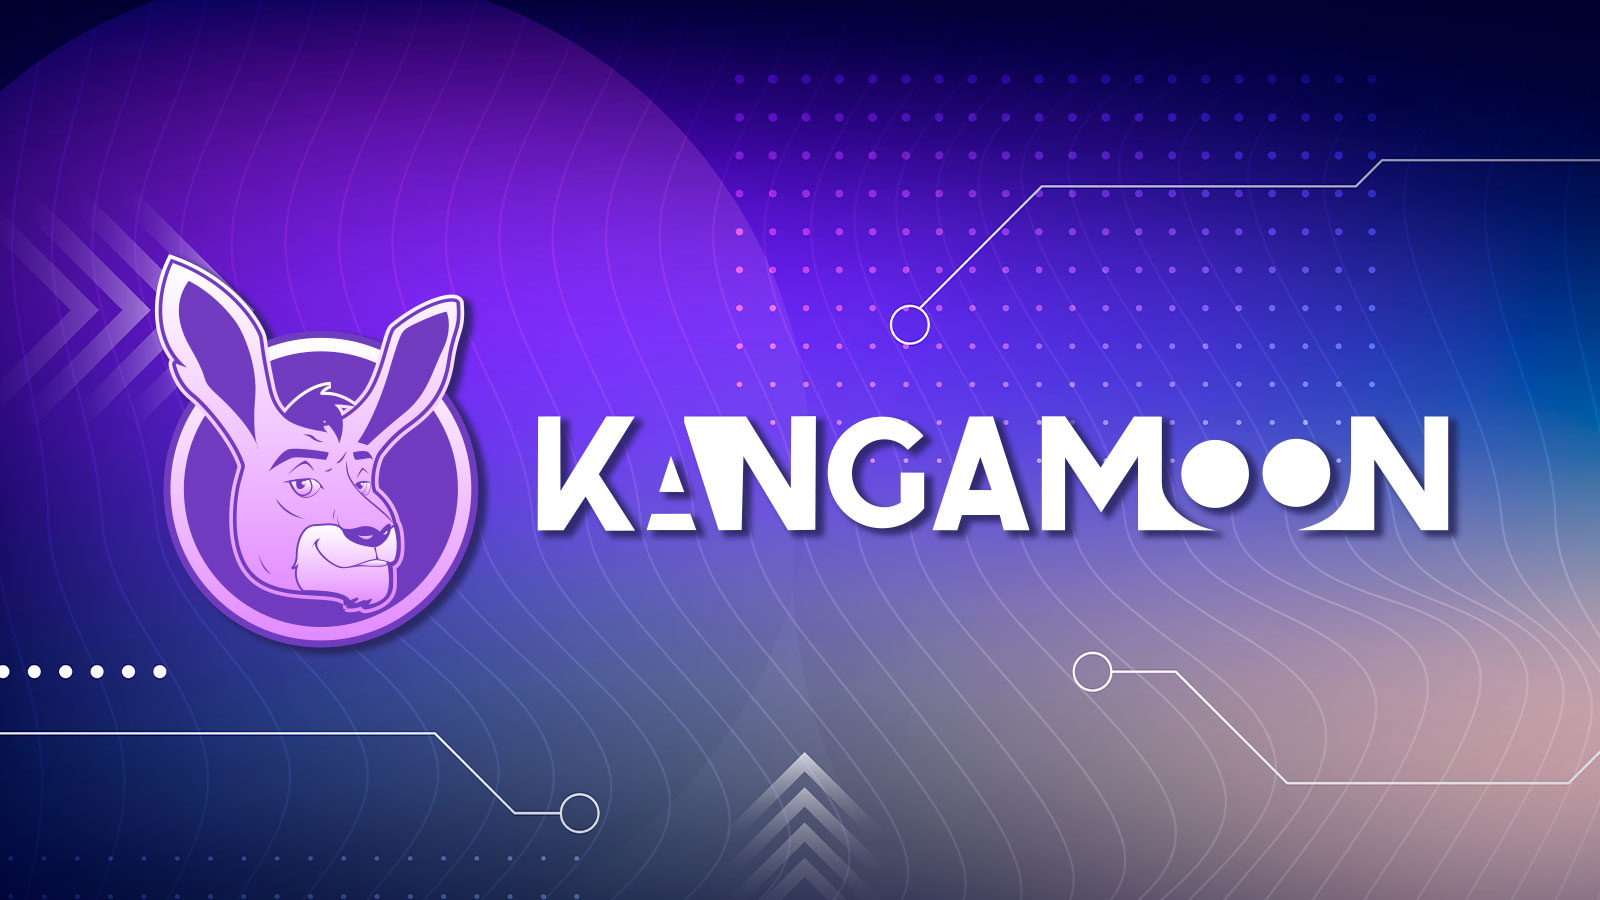 KangaMoon's (KANG) Token Novel Pre-Sale Stage Might Look Interesting for Altcoiners in April as Cardano (ADA), Axie Infinity (AXS) Cryptos Set Trading Volume Local Highs